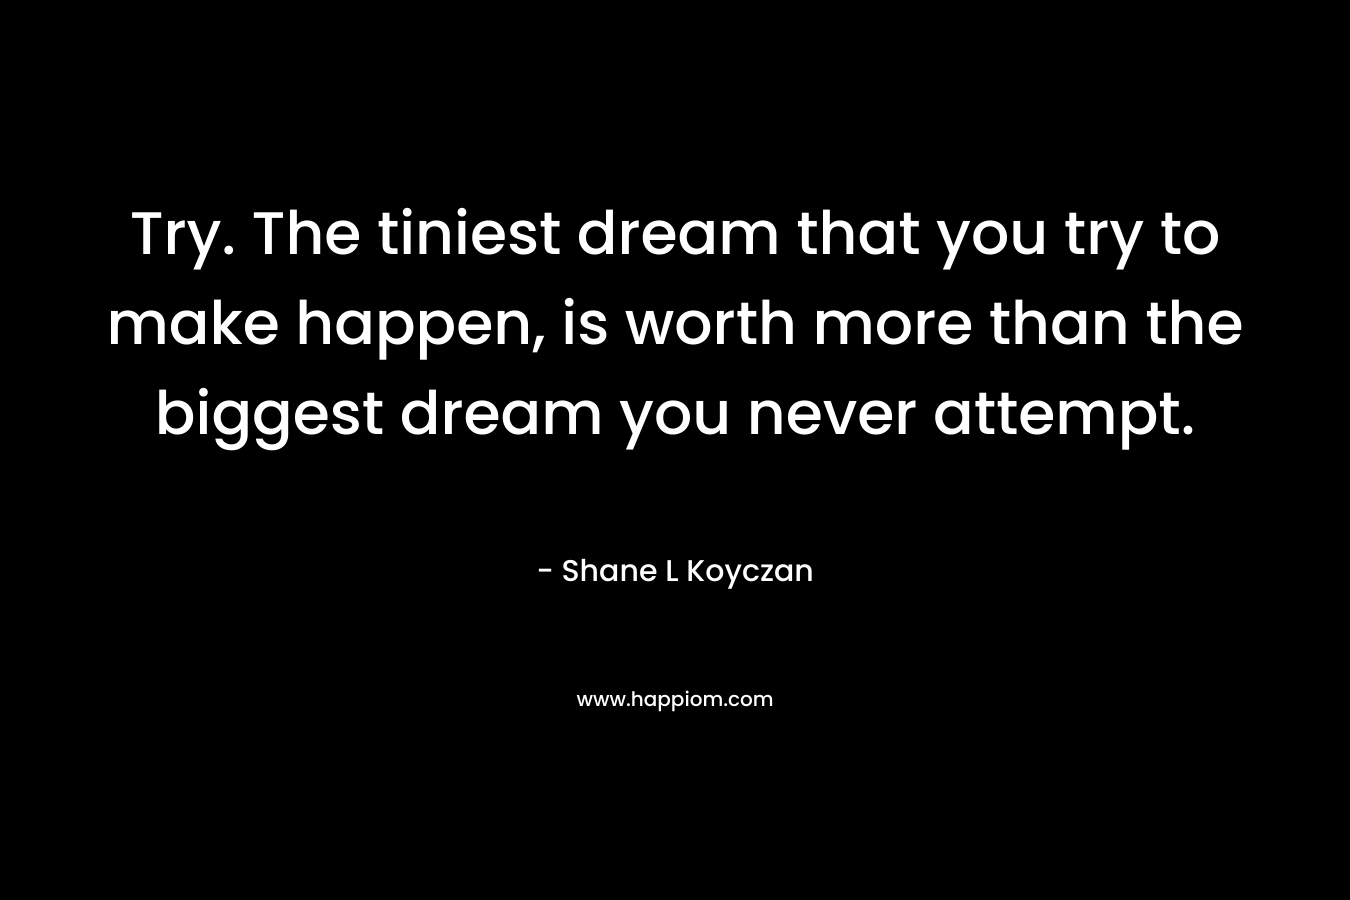 Try. The tiniest dream that you try to make happen, is worth more than the biggest dream you never attempt. – Shane L Koyczan